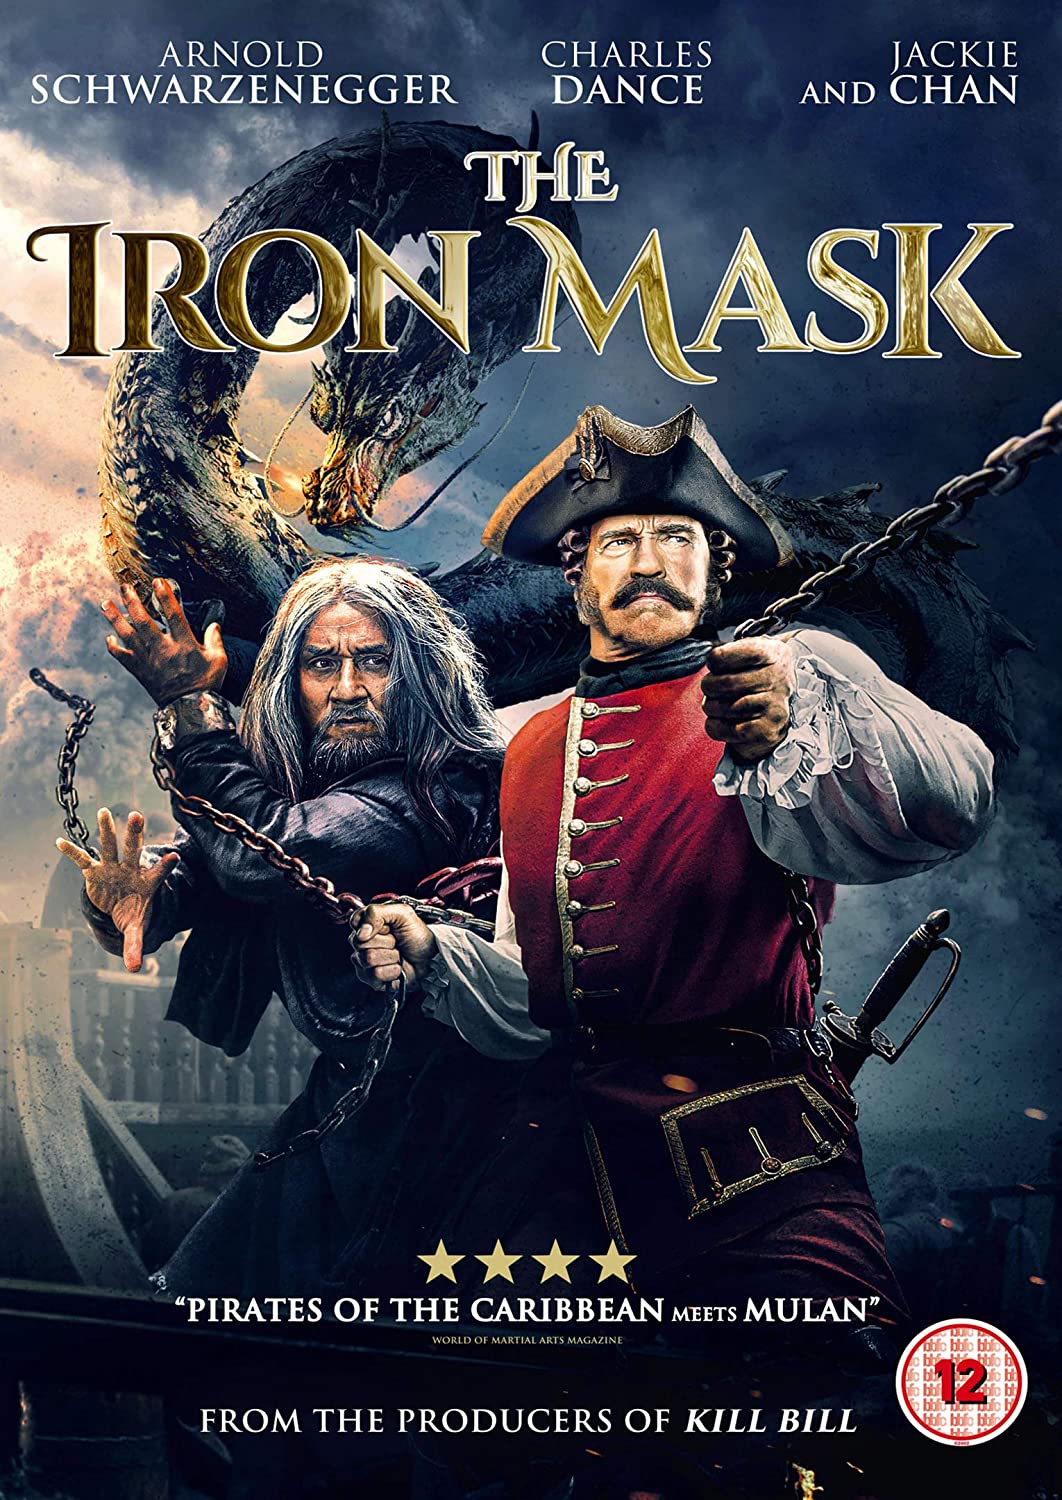 The Iron Mask - Adventure/Action [DVD]